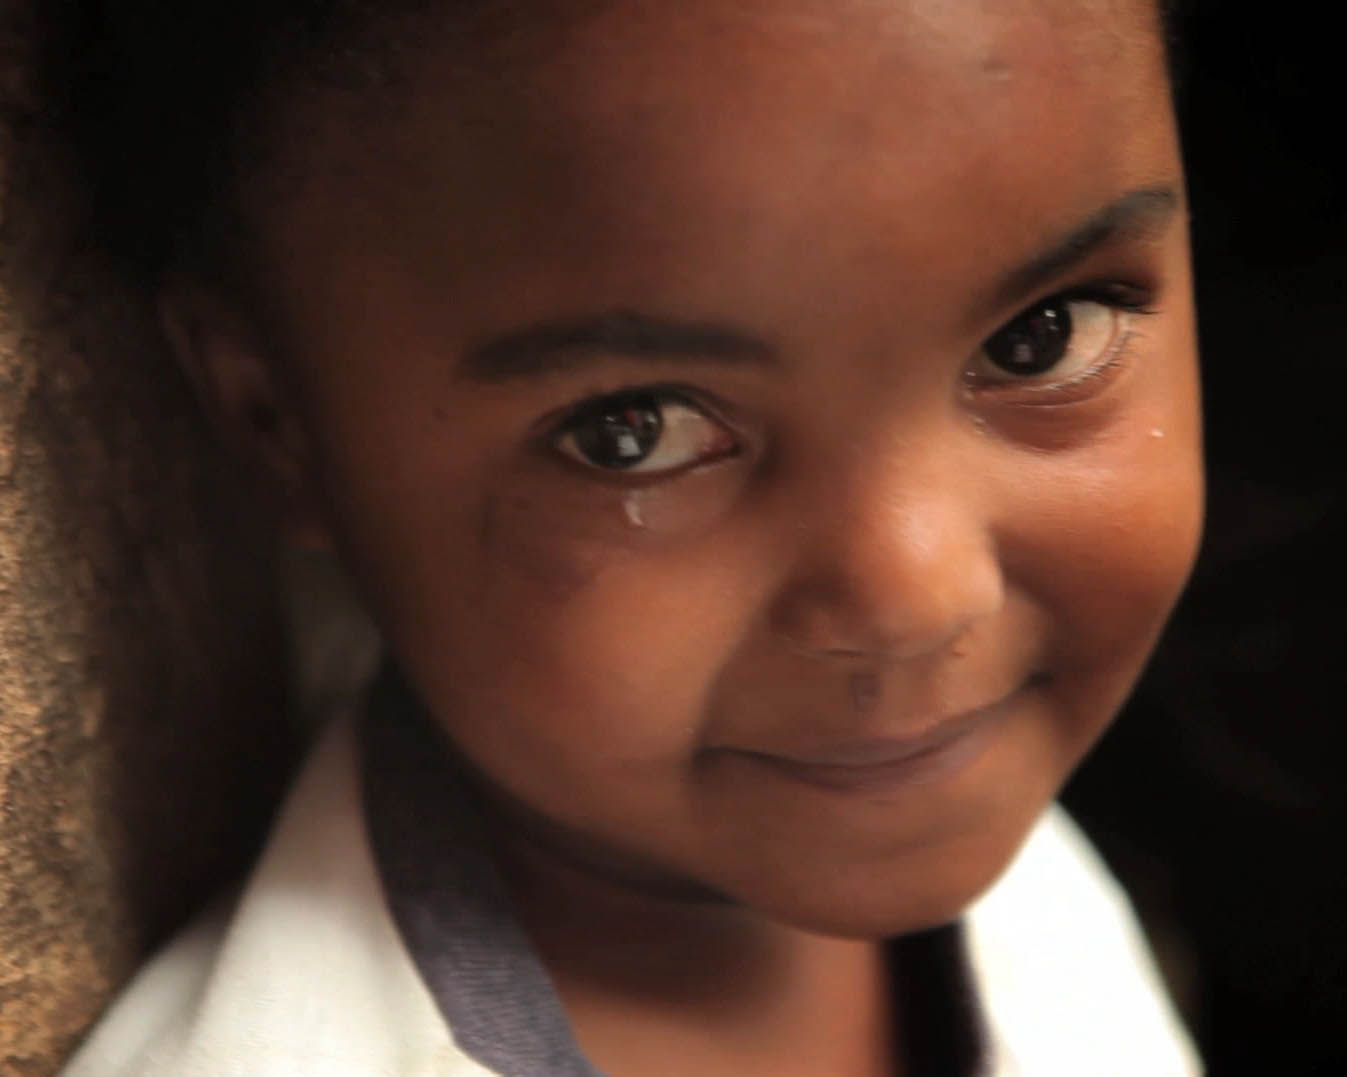 World Vision’s Campaign For Every Child